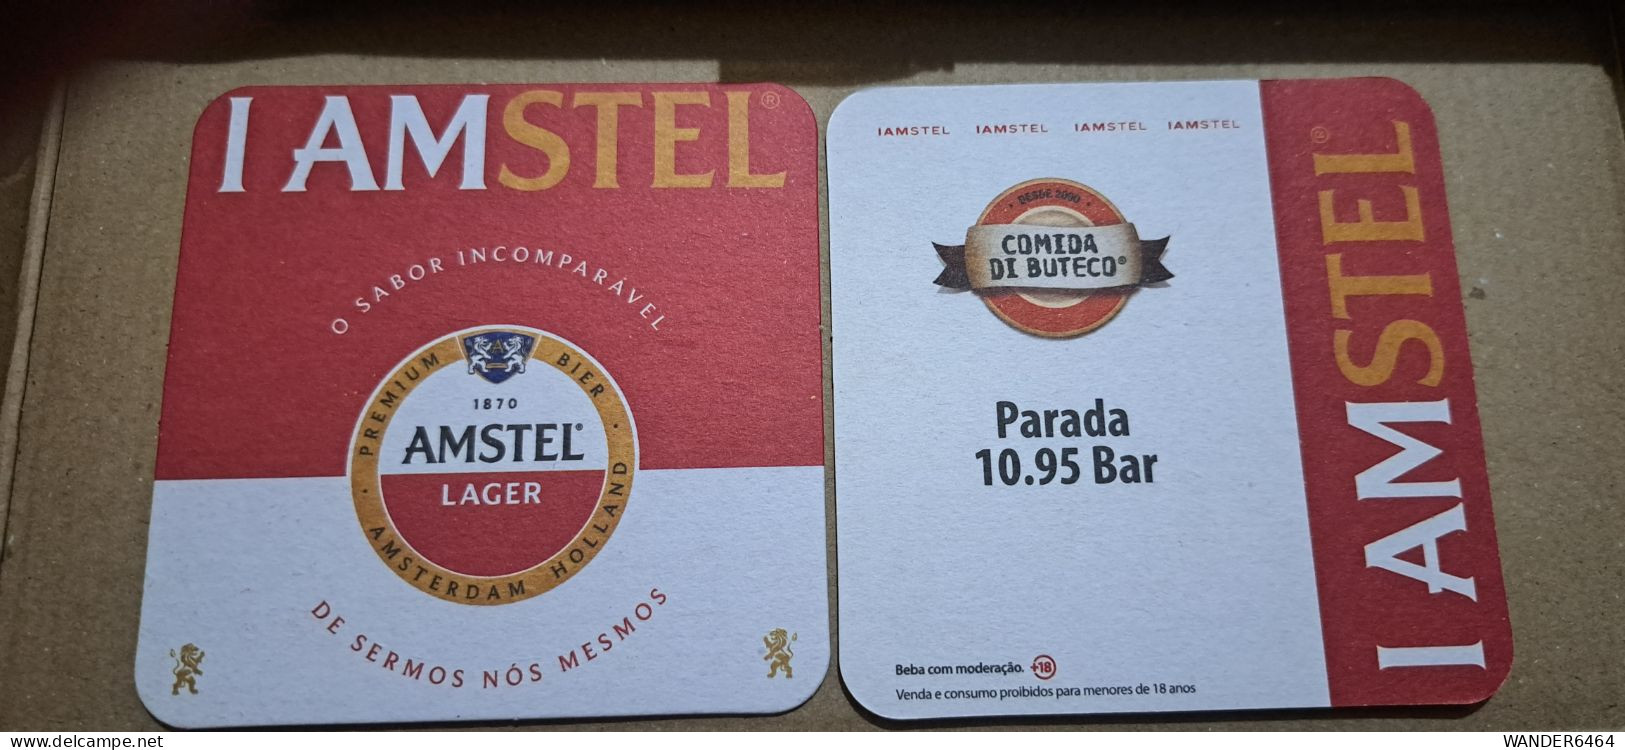 AMSTEL HISTORIC SET BRAZIL BREWERY  BEER  MATS - COASTERS #013 PARADA 10.95 BAR - Sotto-boccale